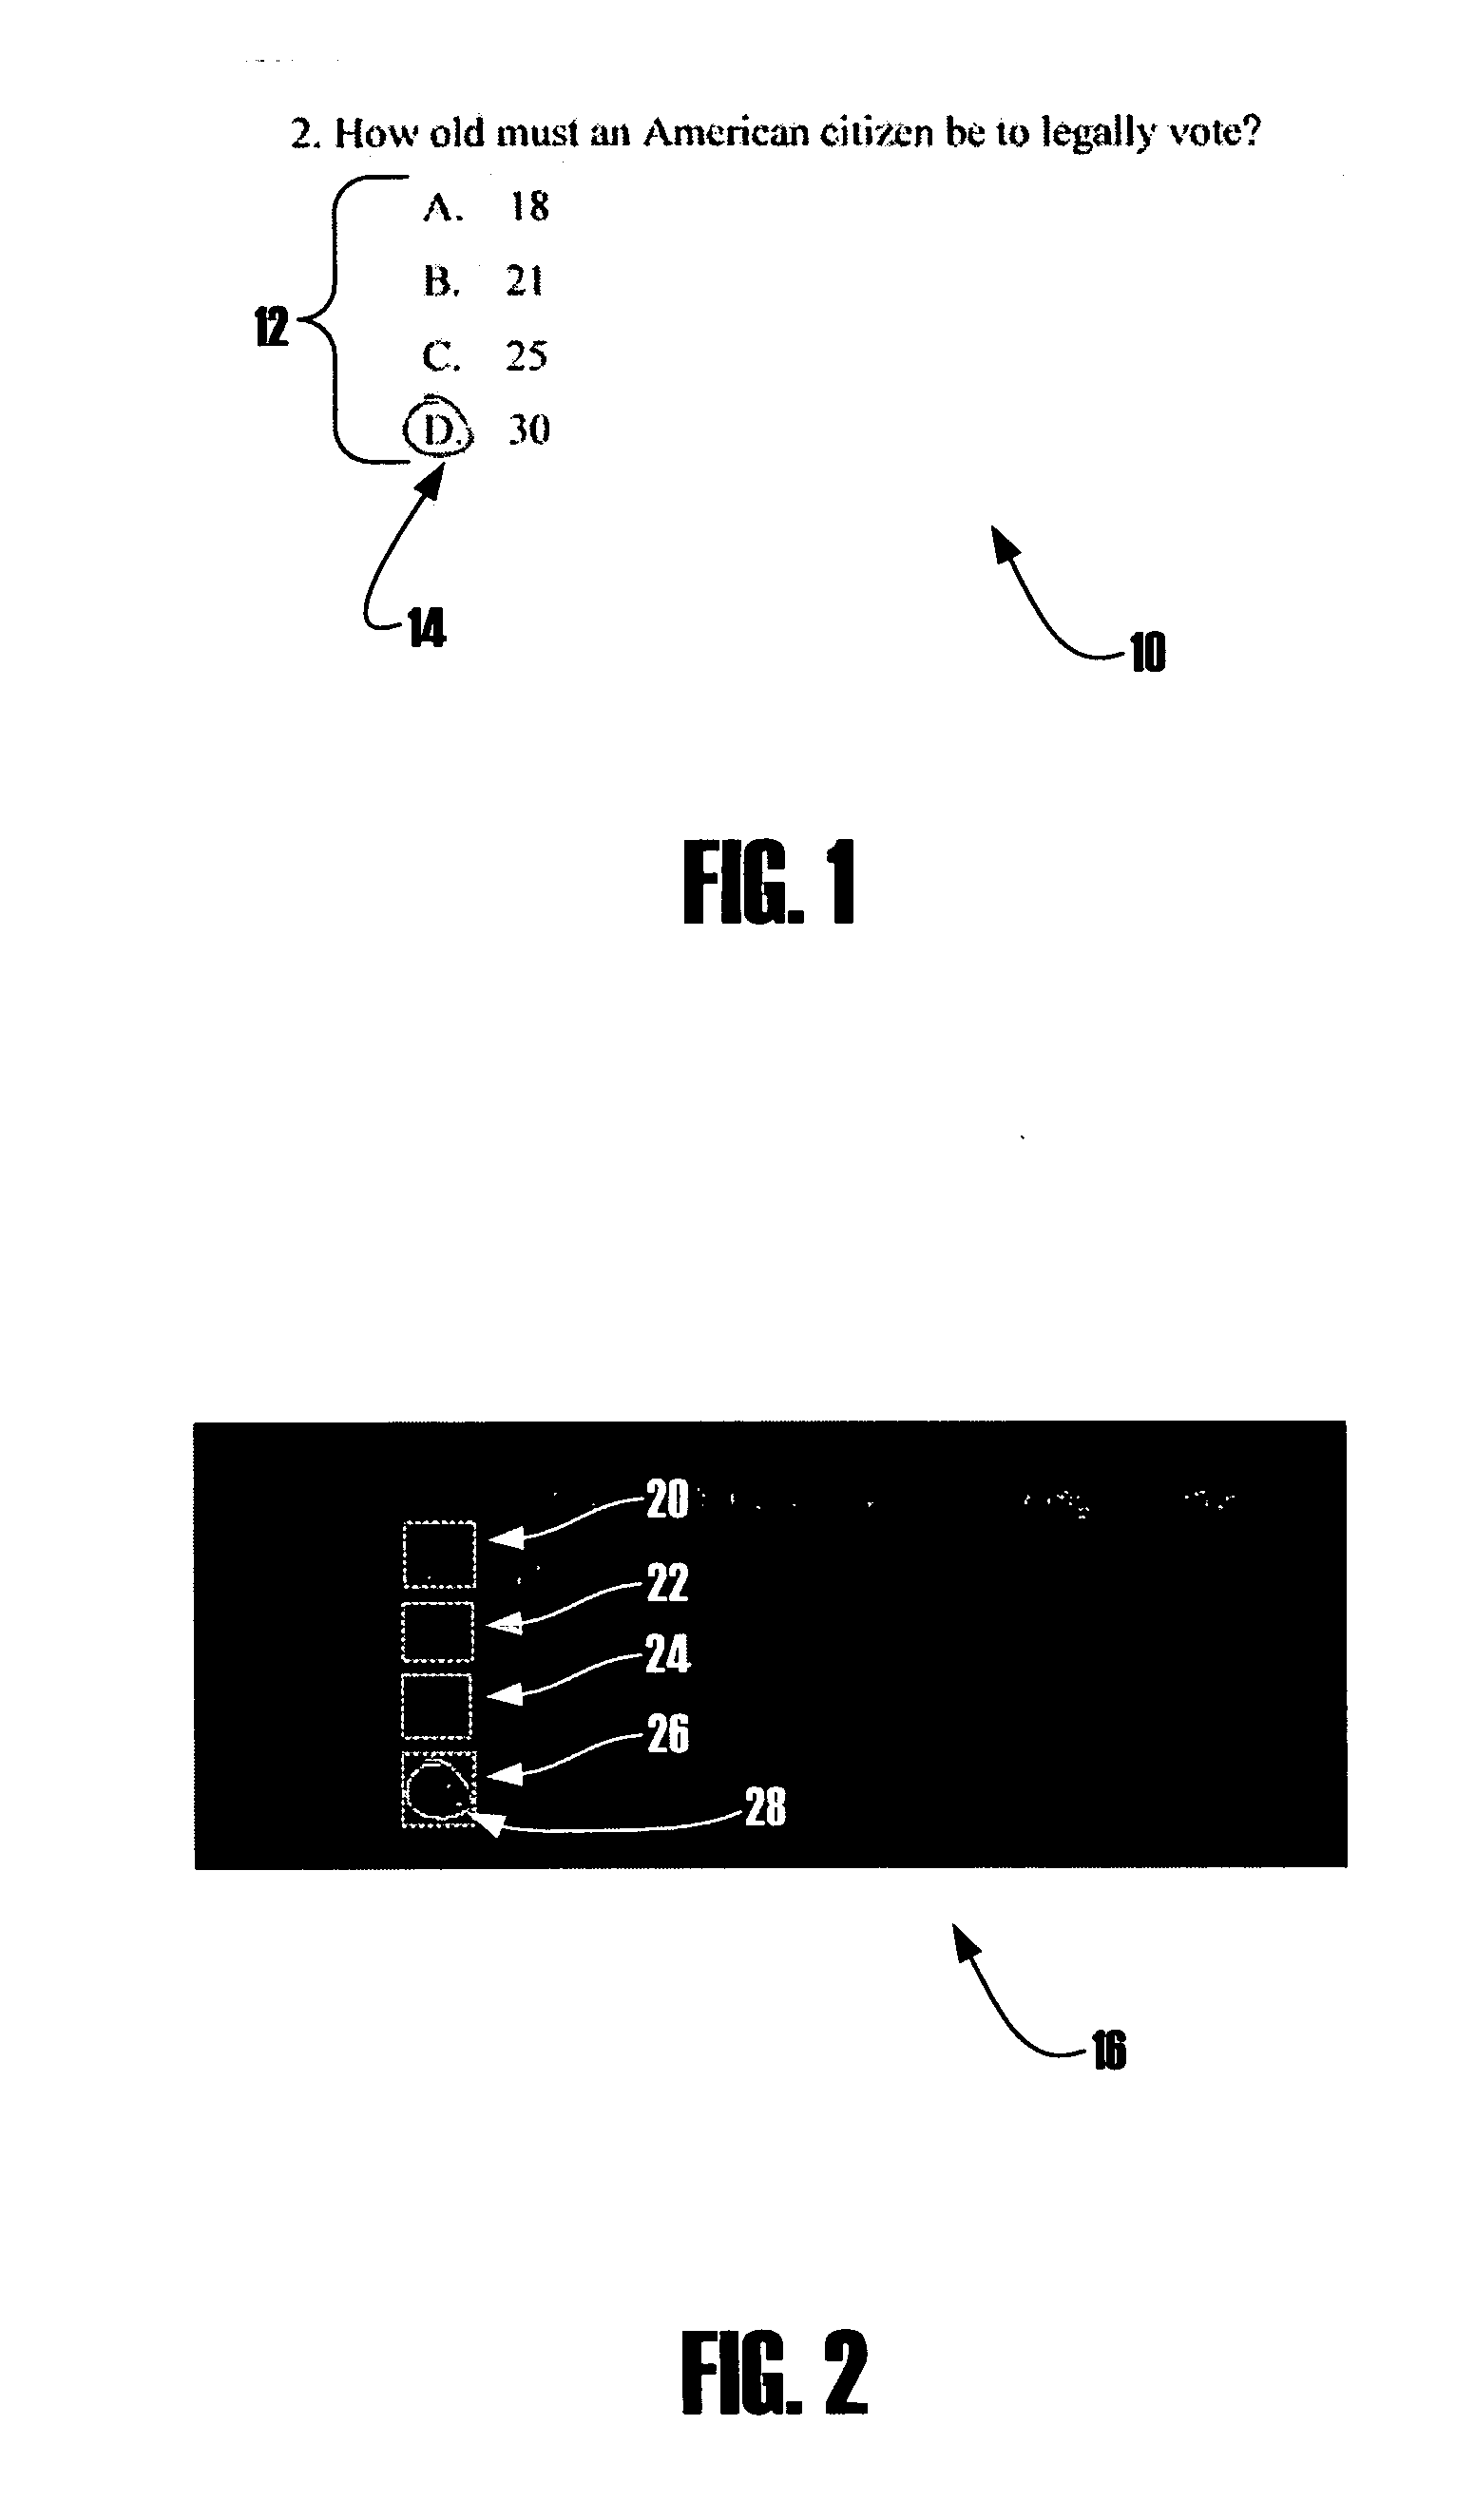 Methods for automatically identifying user selected answers on a test sheet